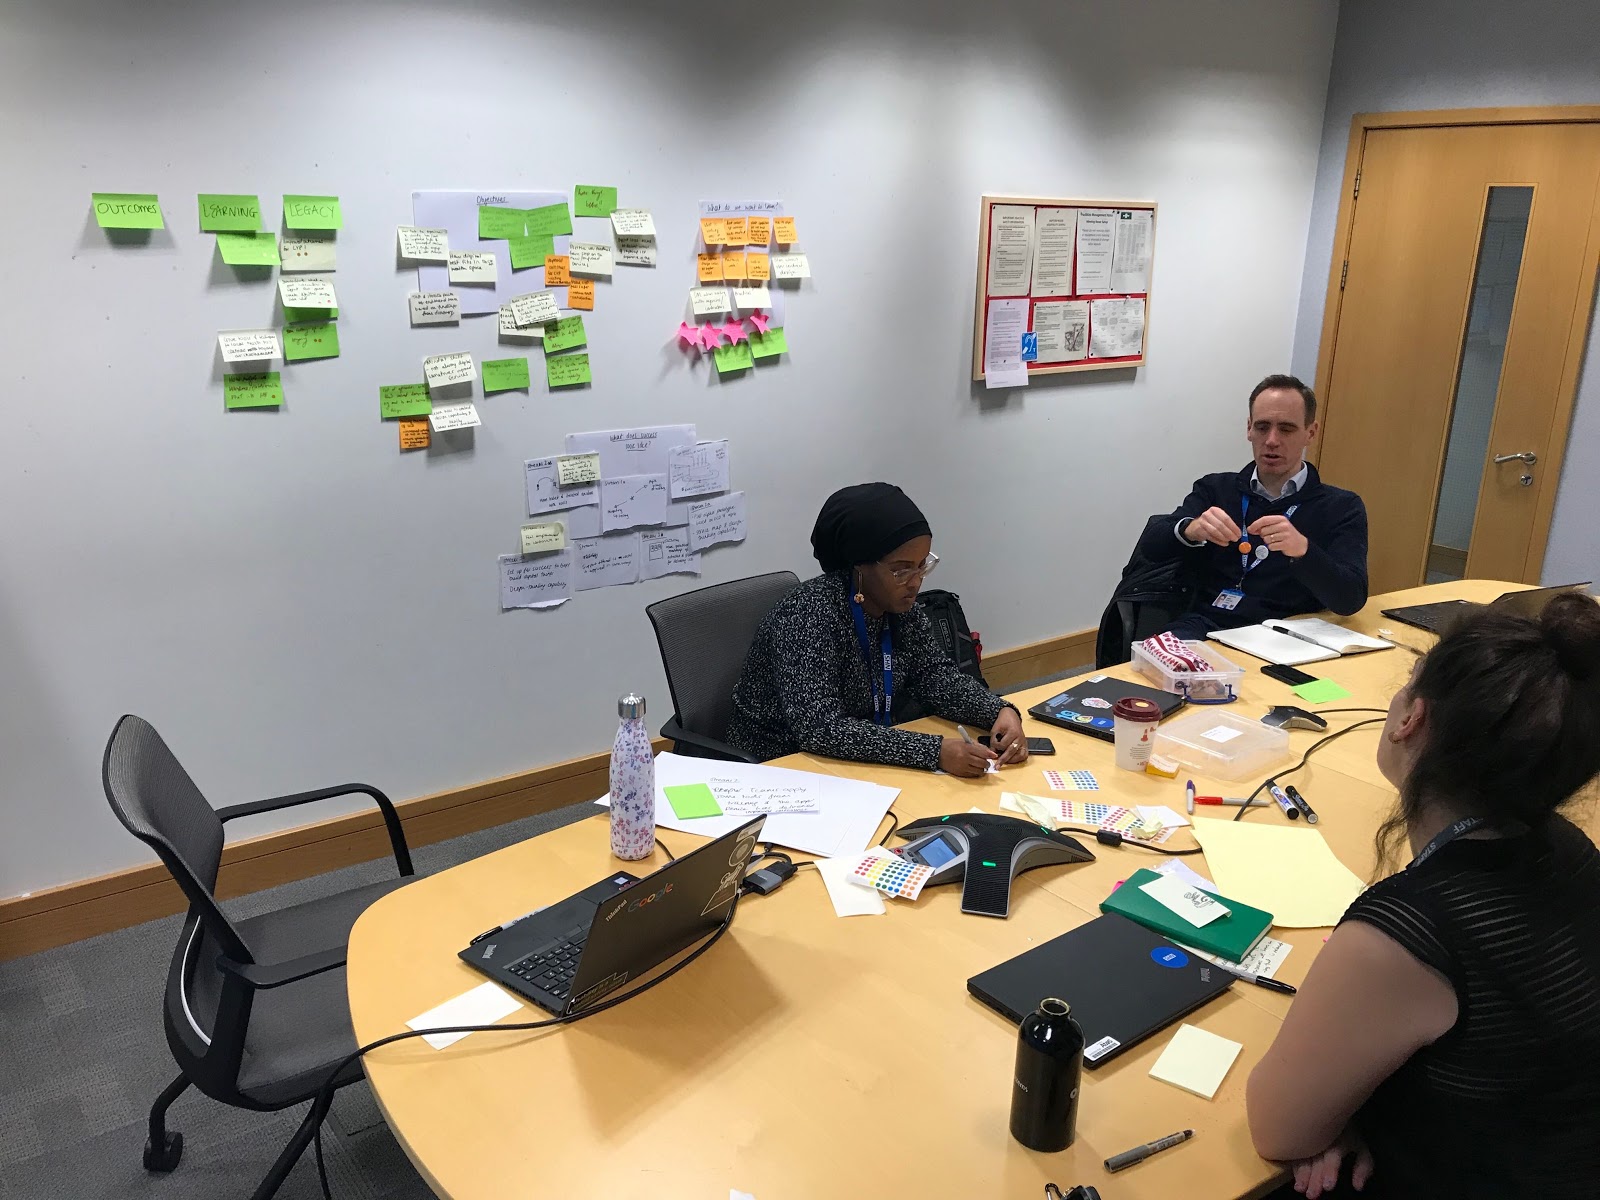 Team members around a table with post-it notes discussing objectives